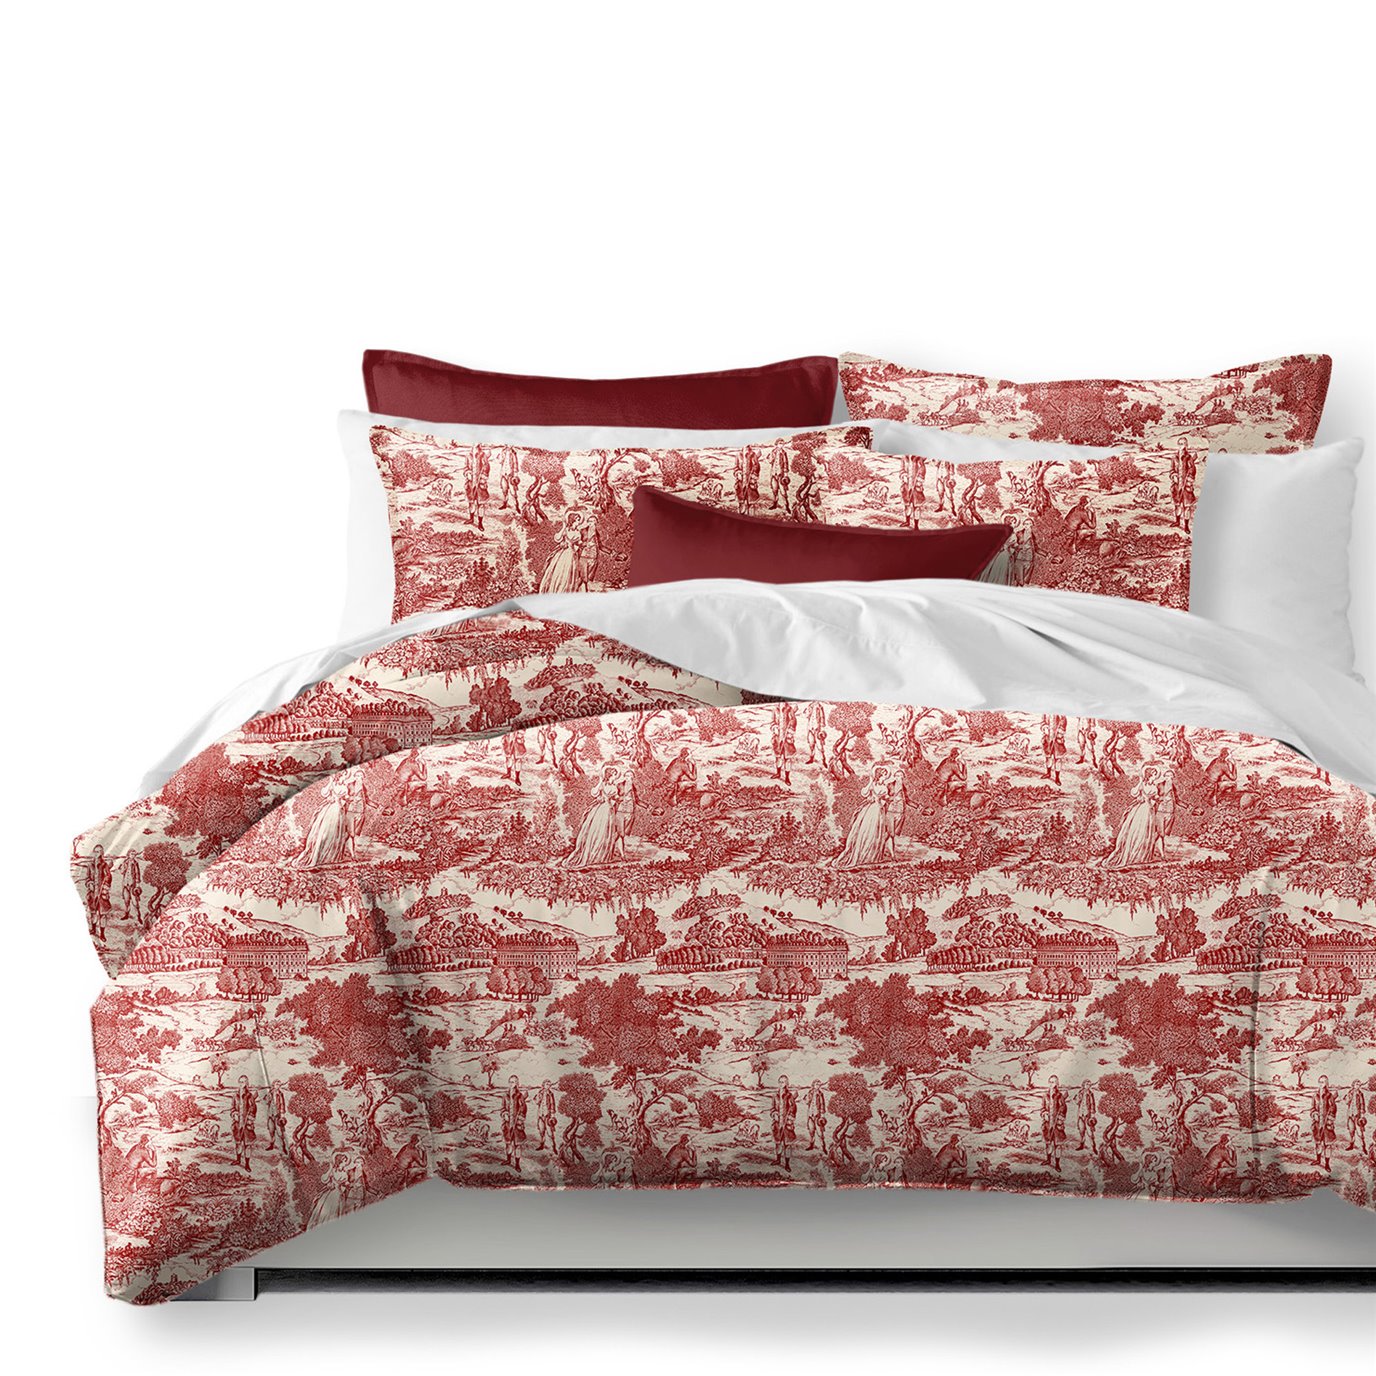 Beau Toile Red Comforter and Pillow Sham(s) Set - Size Queen